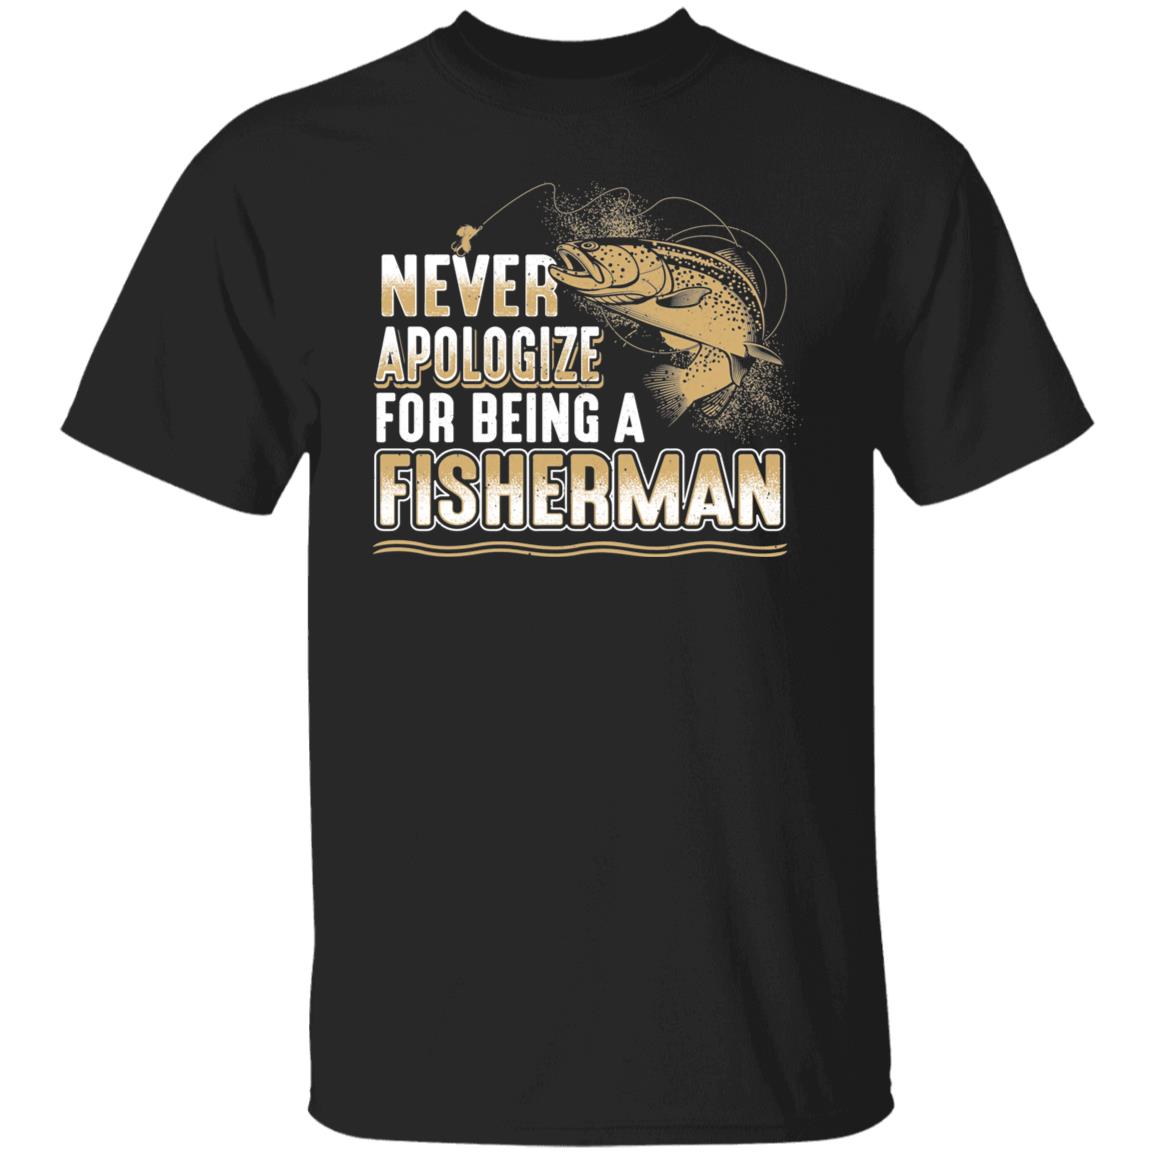 Never apologize for being a fisherman t-shirt black